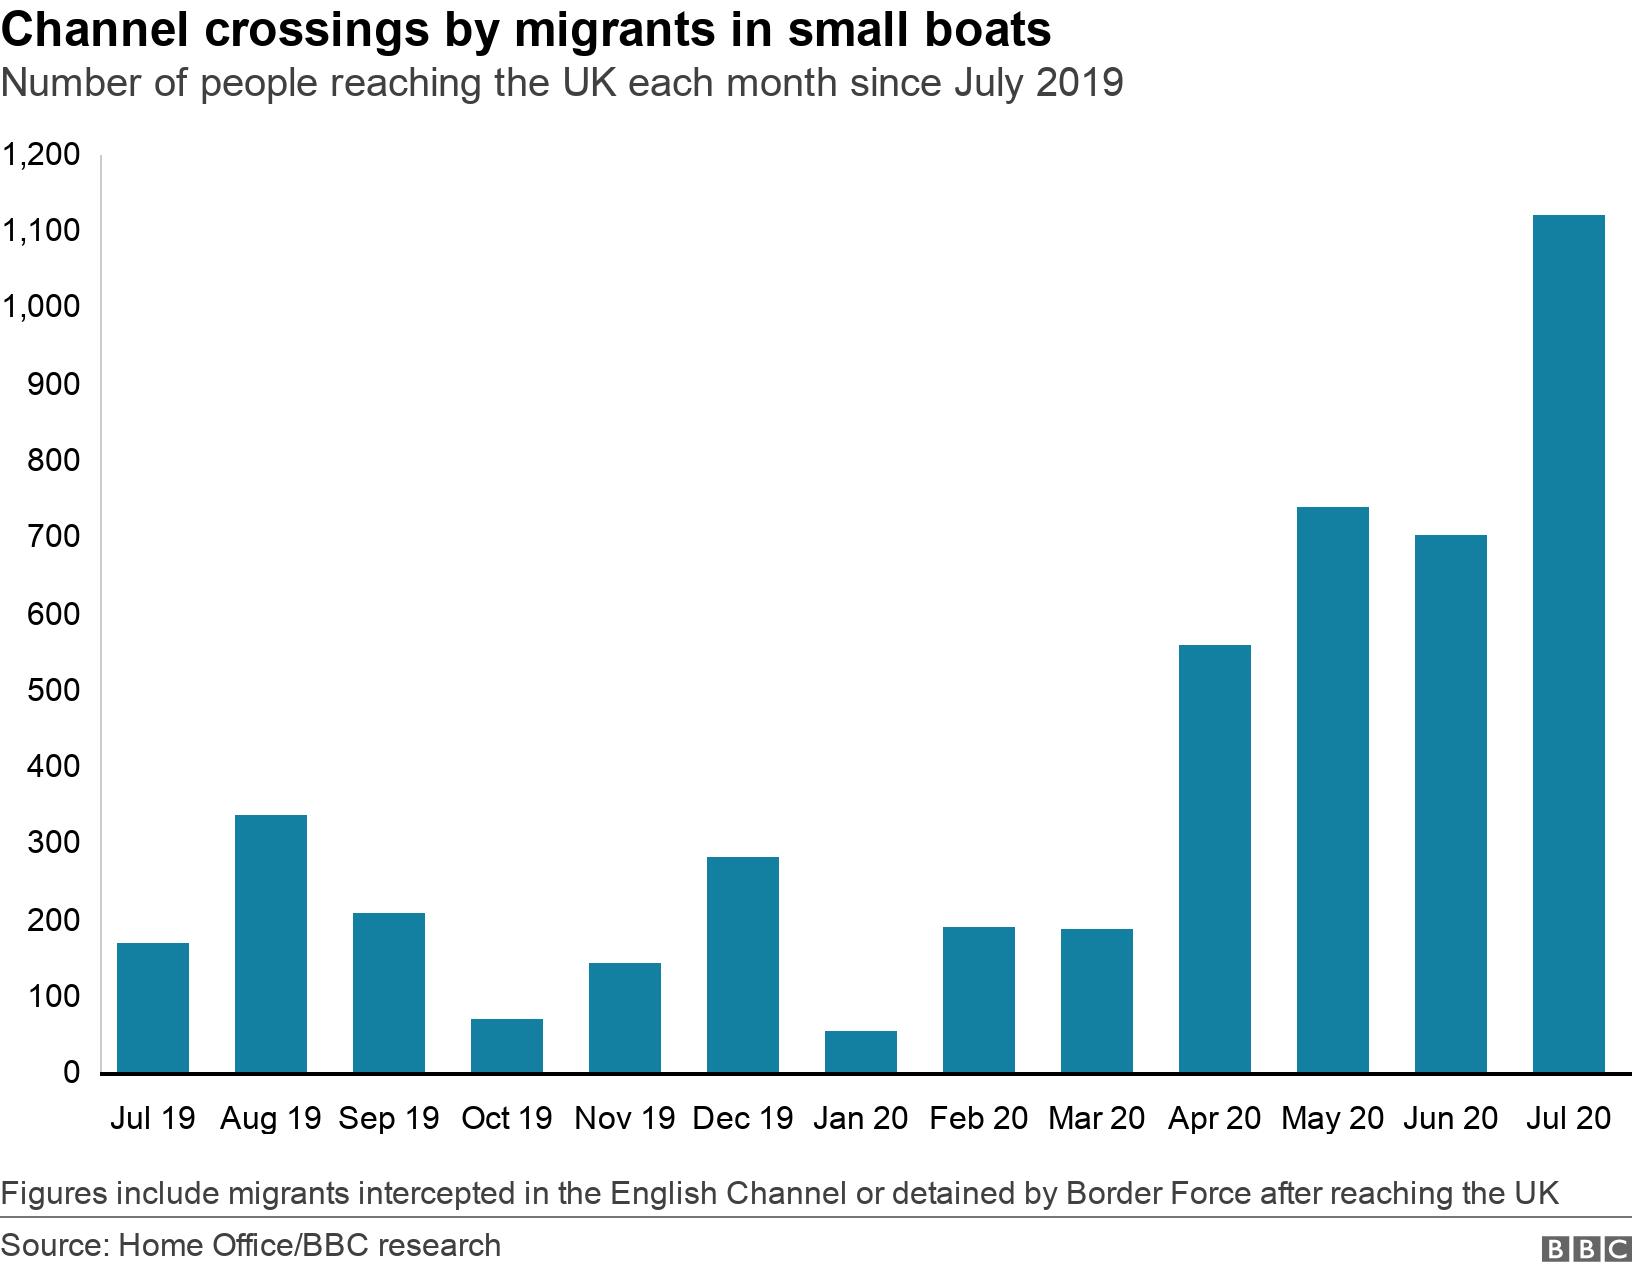 Channel crossings by migrants in small boats. Number of people reaching the UK each month since July 2019.  Figures include migrants  intercepted in the English Channel or detained by Border Force after reaching the UK.